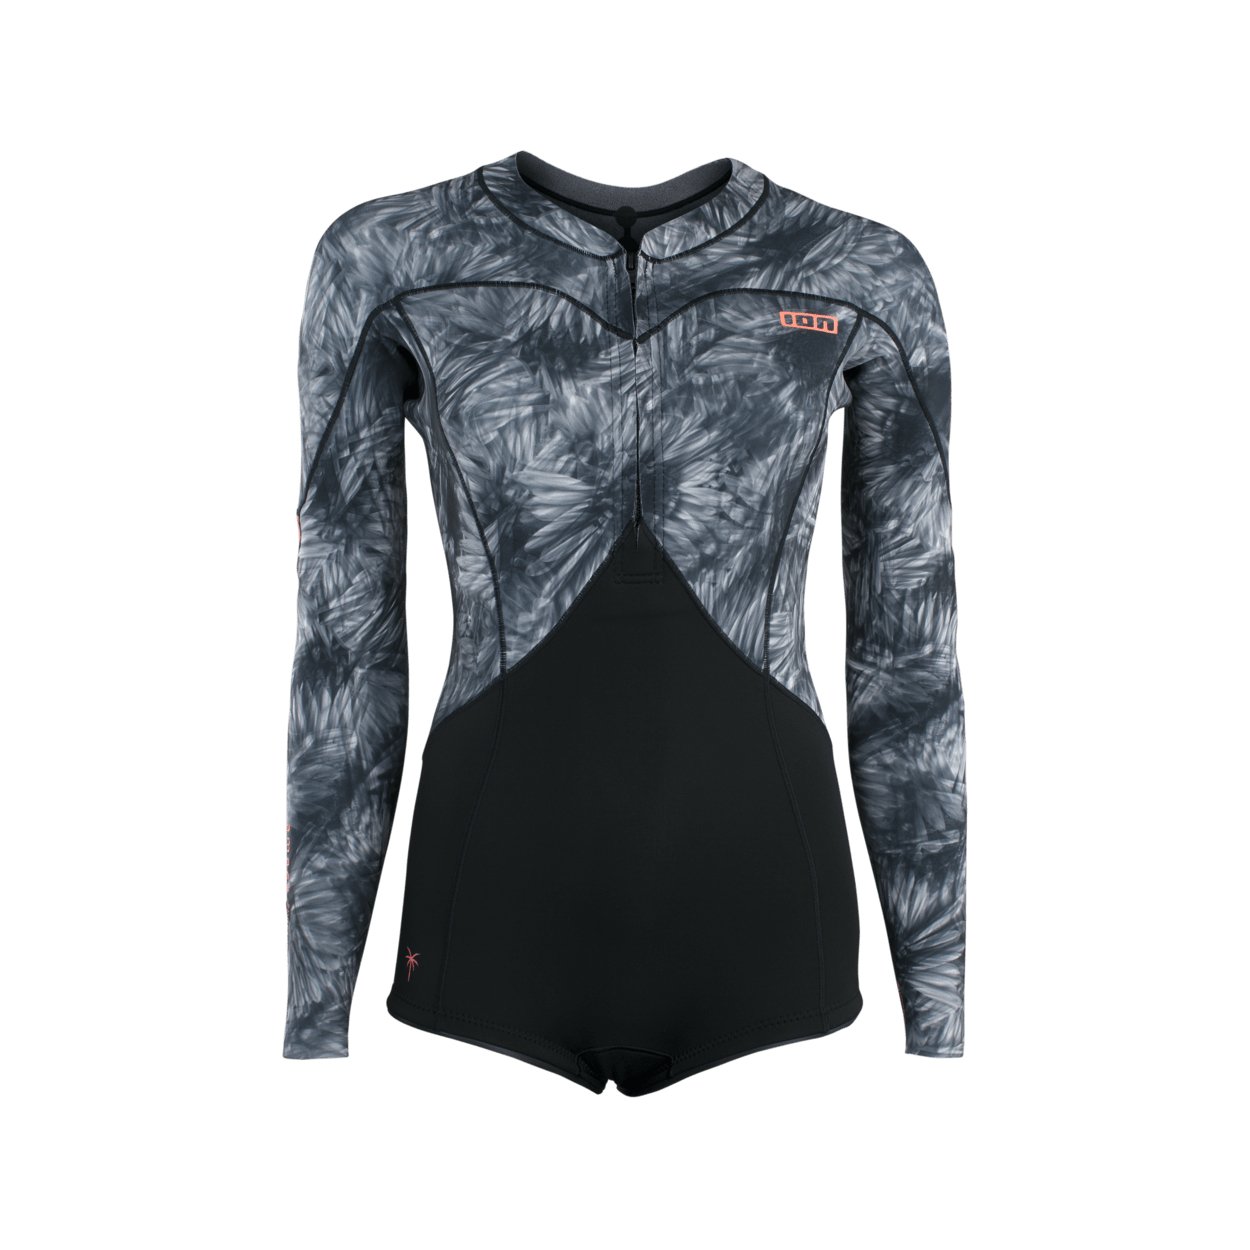 ION Amaze Hot Shorty 1.5 LS Front Zip 2023 - Worthing Watersports - 9010583091310 - Wetsuits - ION Water